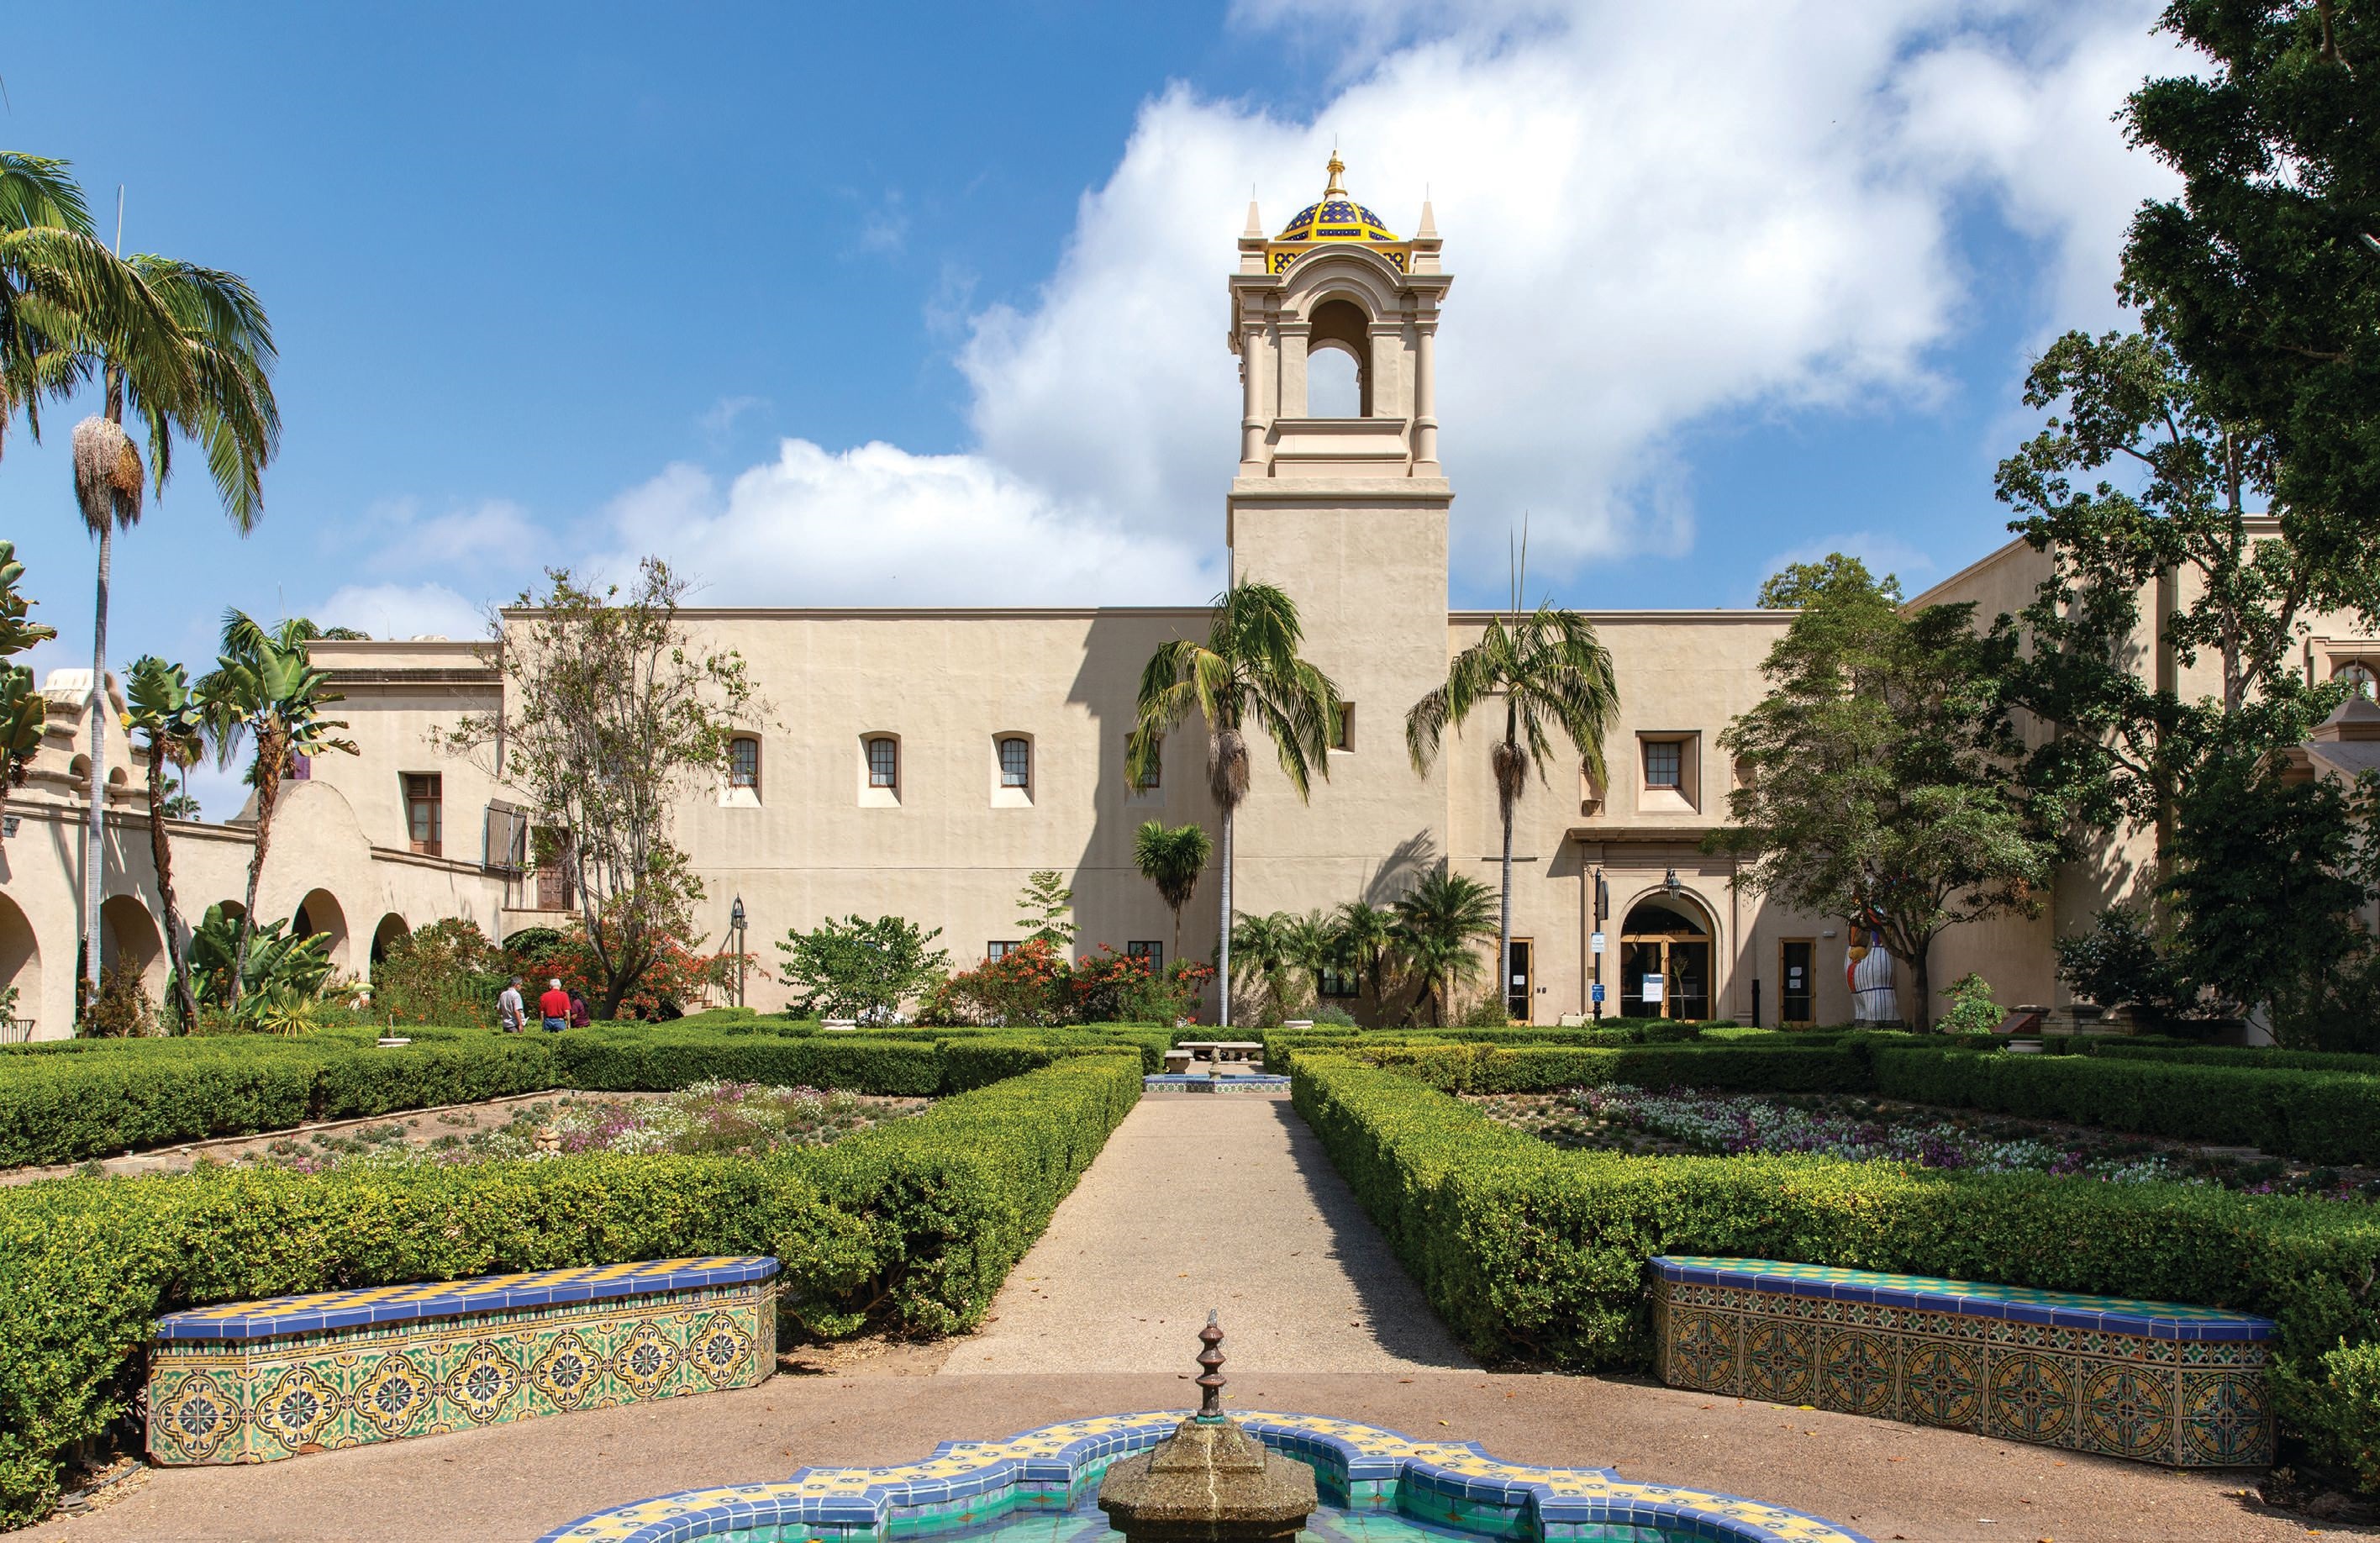 Balboa Park’s renovated Mingei International Museum in the historic House of Charm building. PHOTO COURTESY OF MINGEI INTERNATIONAL MUSEUM